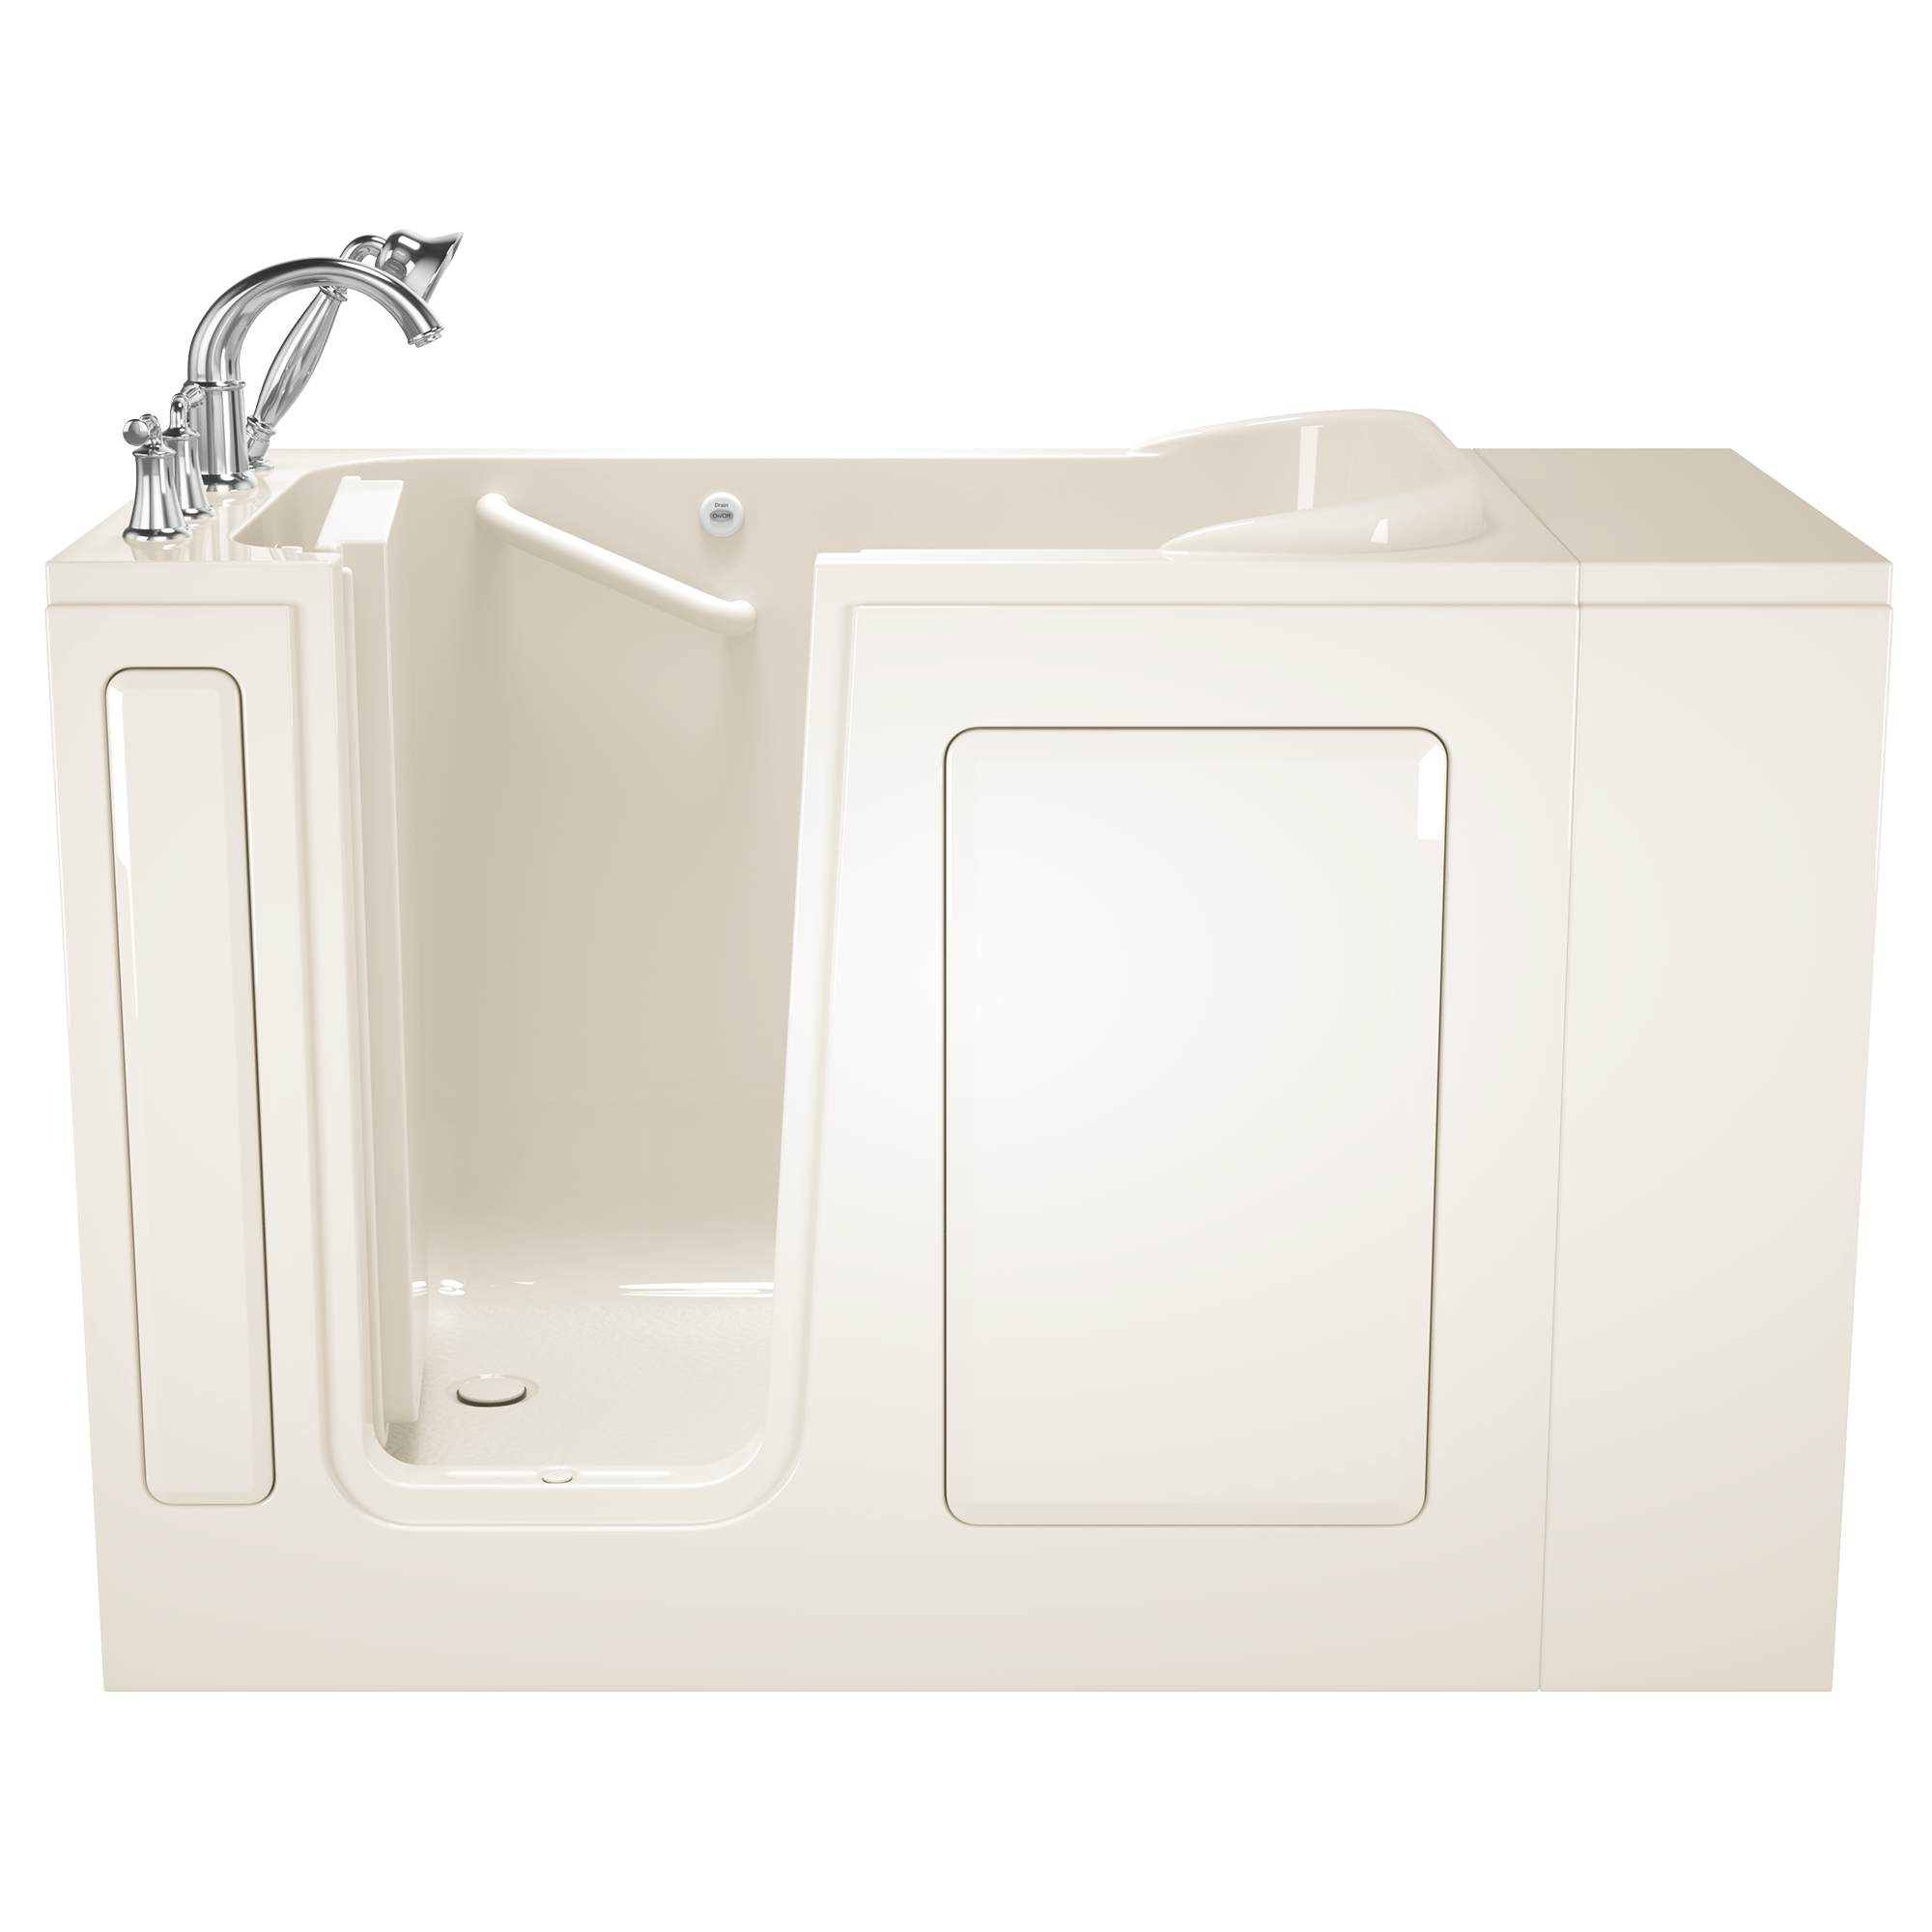 Gelcoat Value Series 28 x 48 Inch Walk in Tub With Soaker System   Left Hand Drain With Faucet WIB LINEN